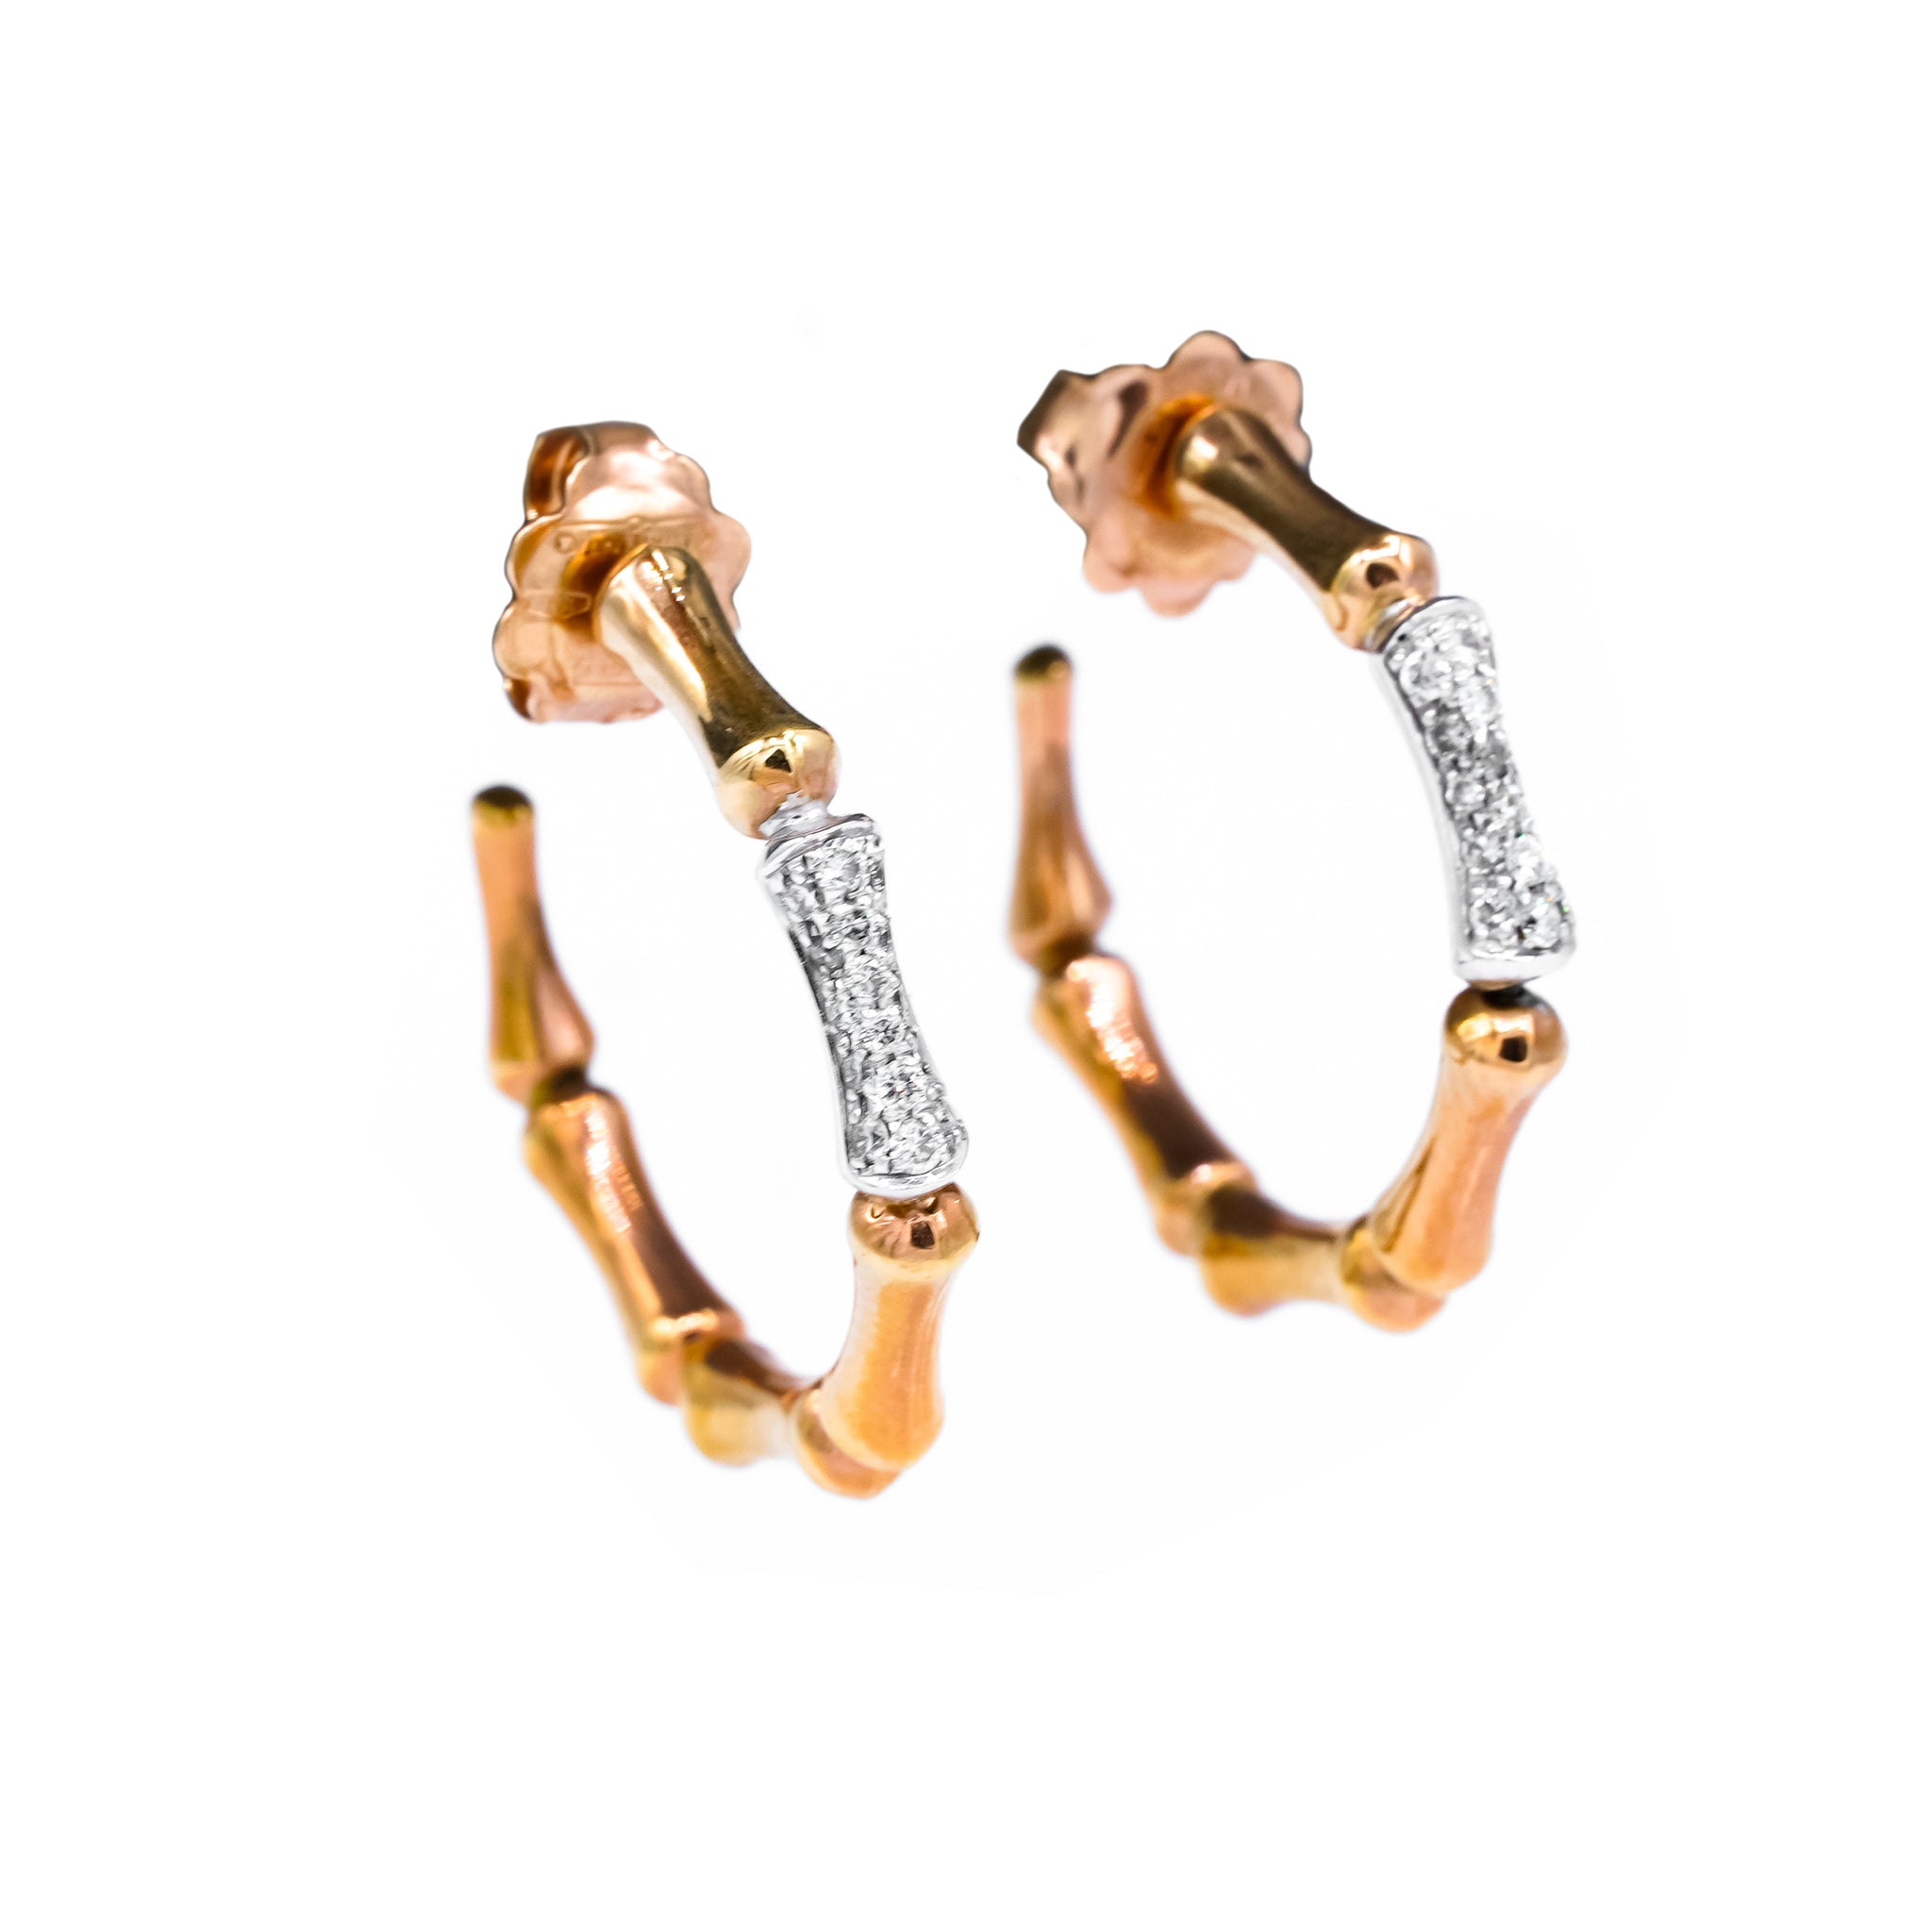 CHIMENTO - TWO-TONE GOLD EARRINGS WITH DIAMONDS